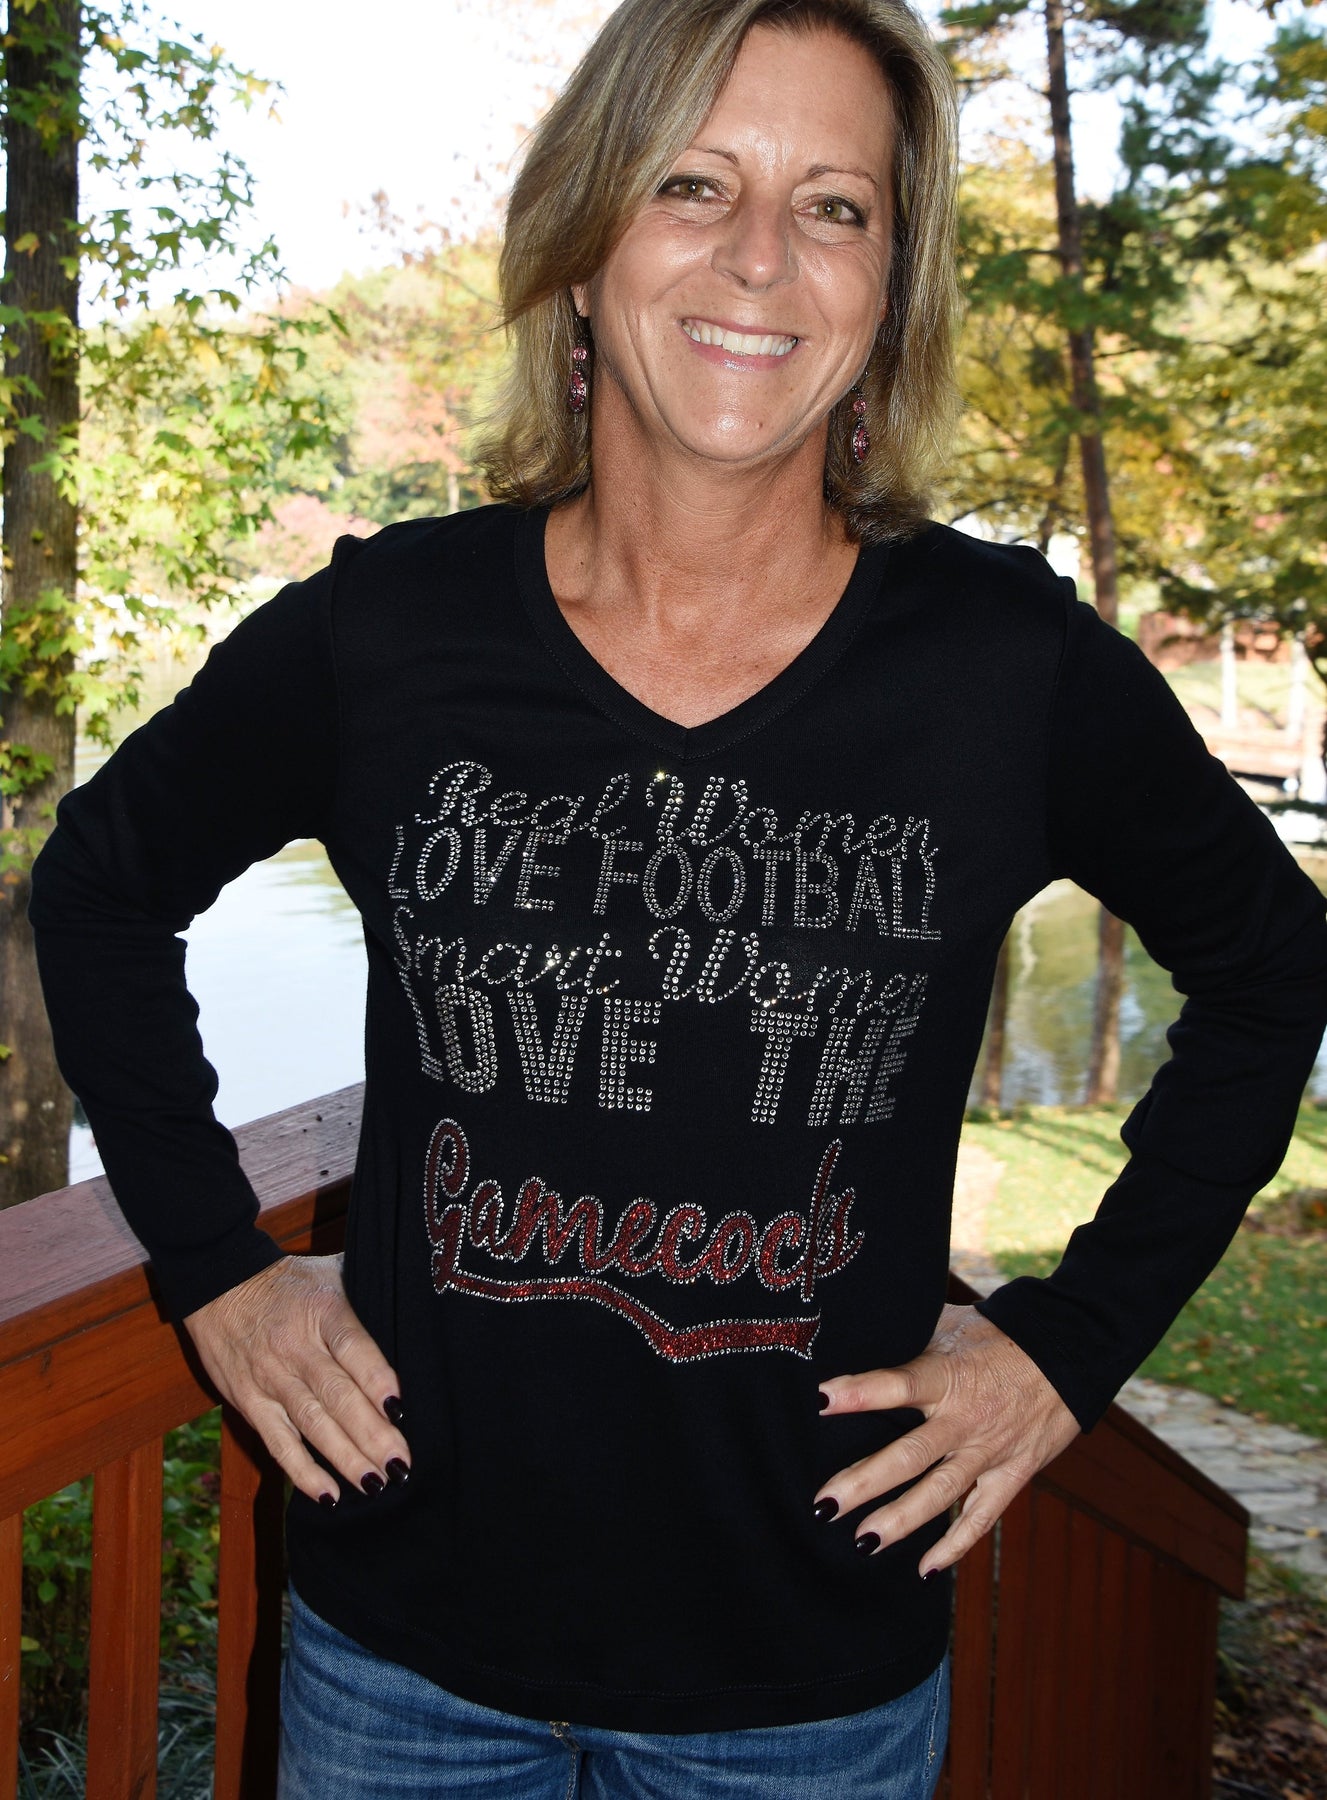 mom football jersey with bling